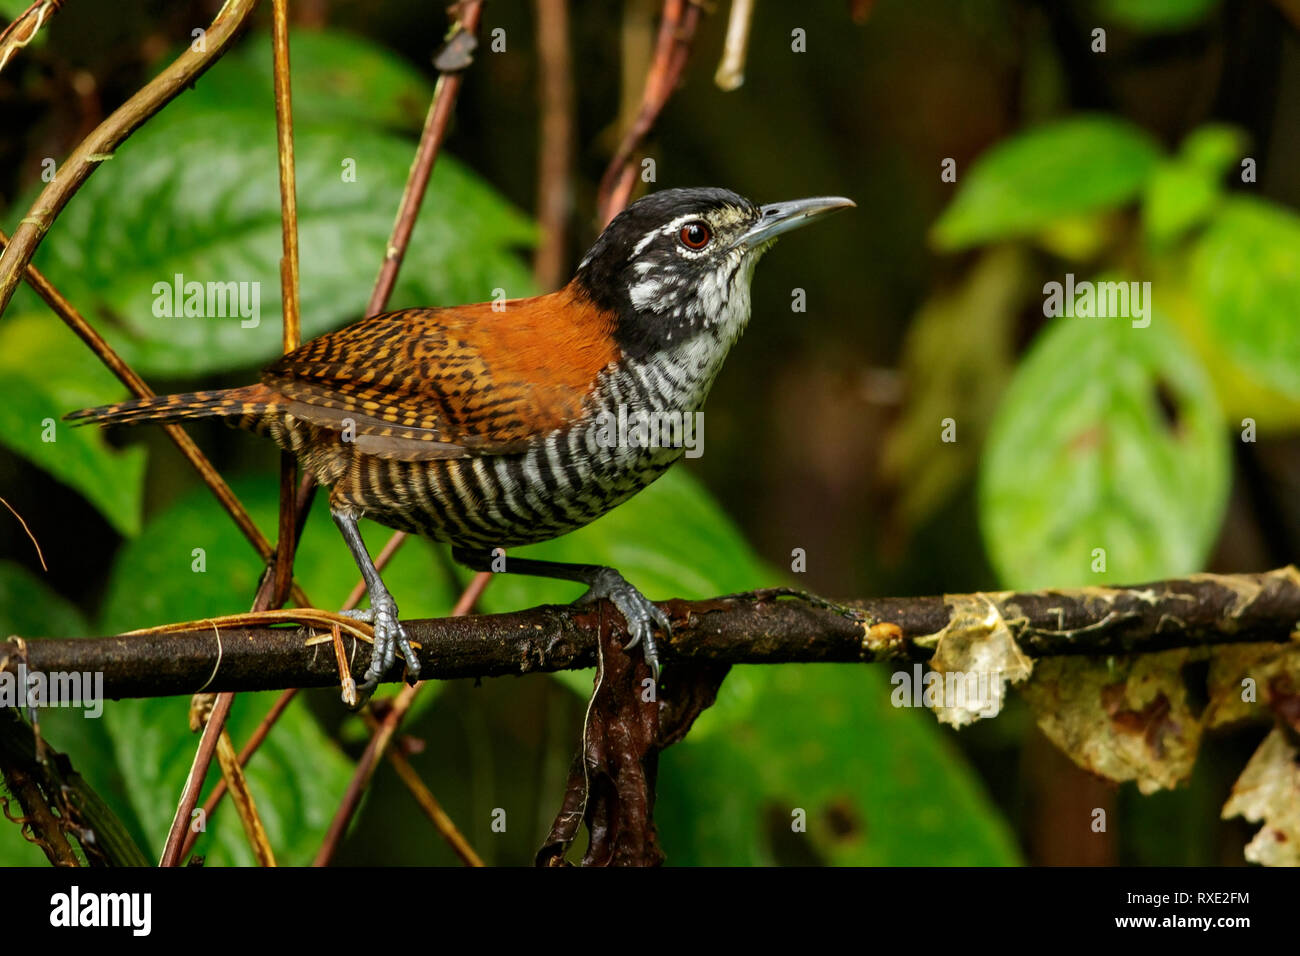 Bay Wren (Thryothorus nigricapillus) perched on a branch in the Andes mountains of Colombia. Stock Photo